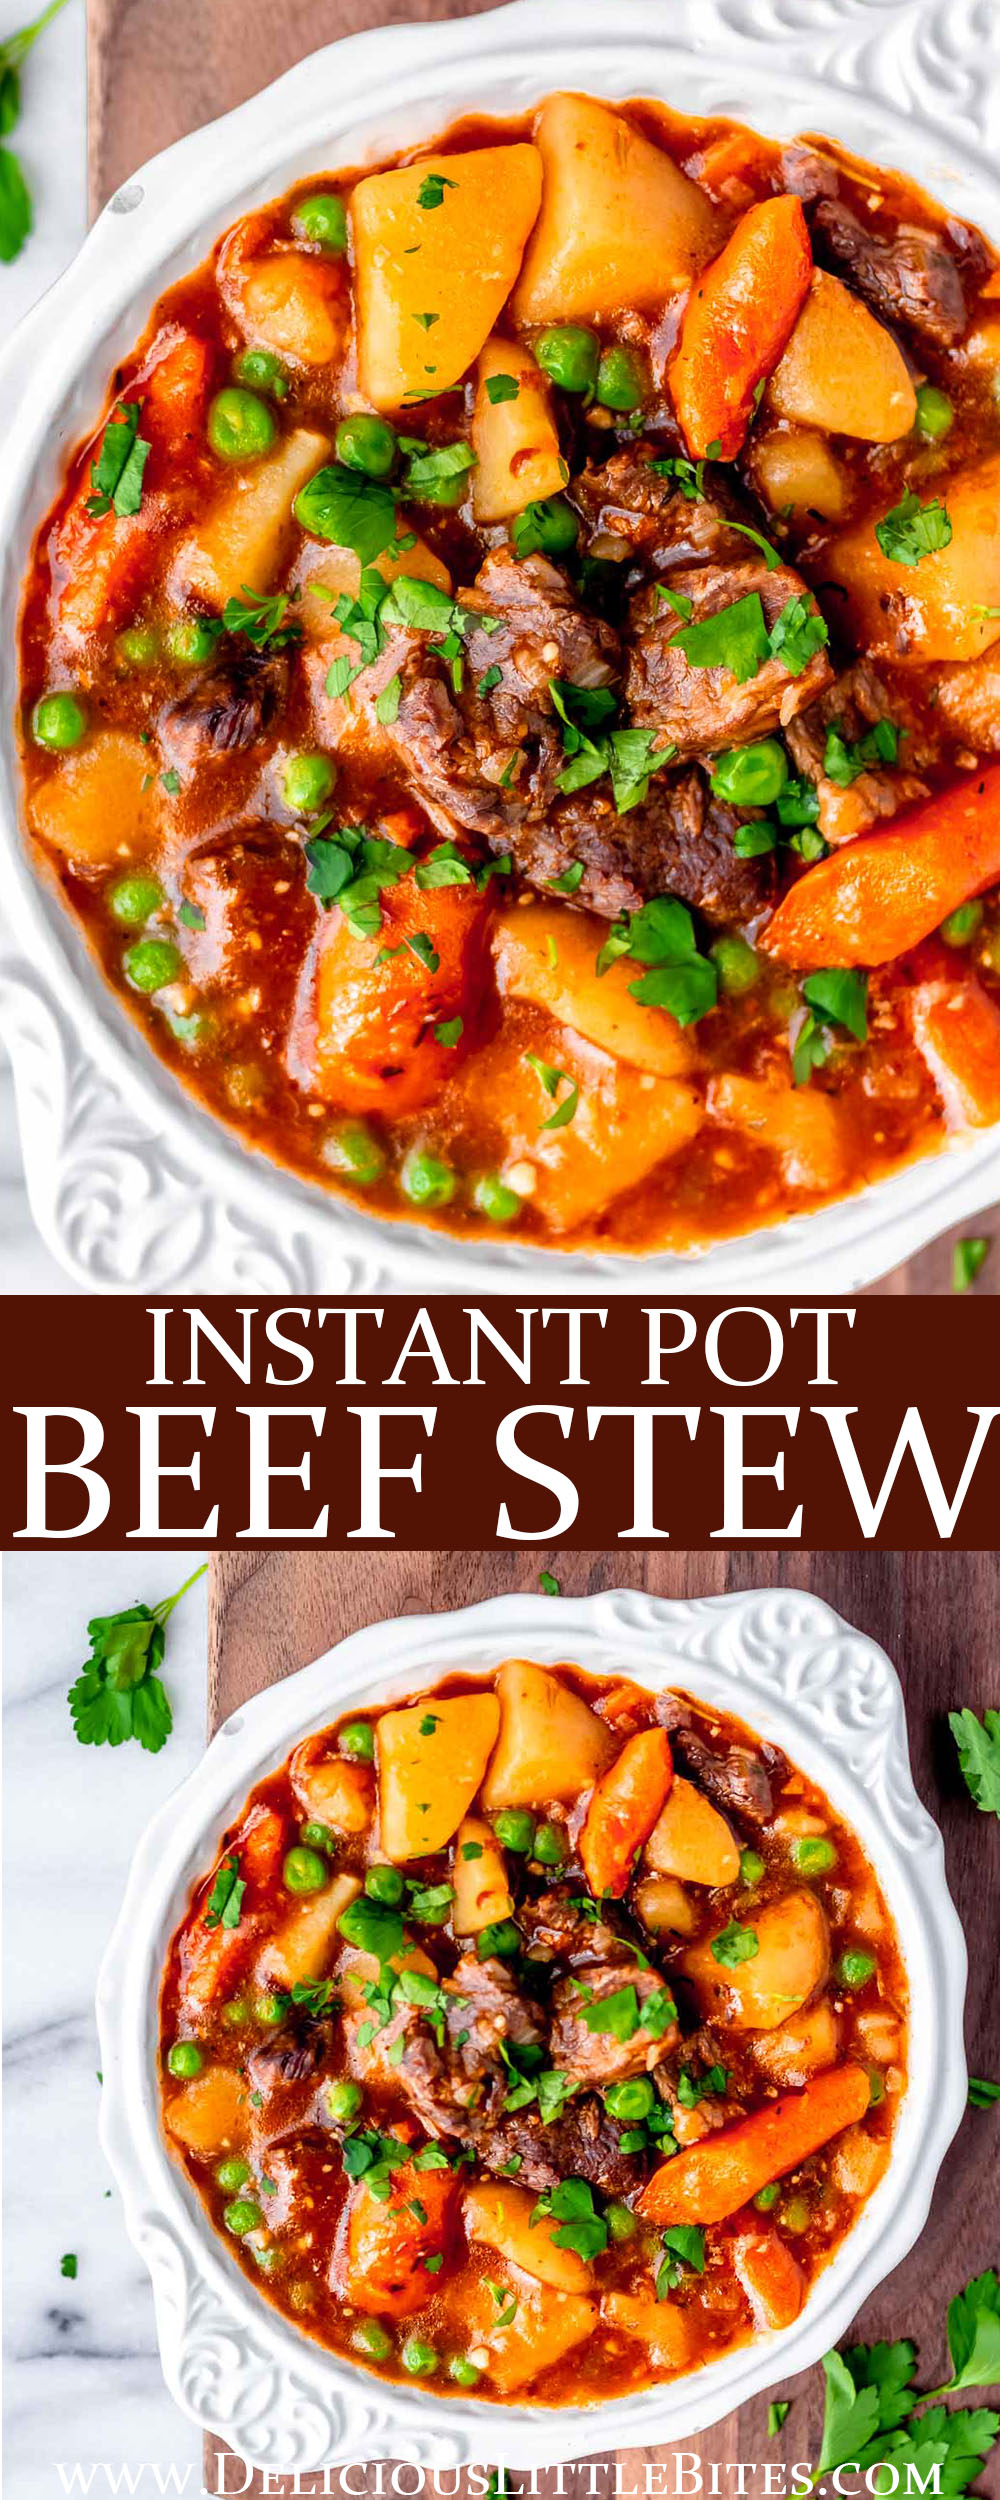 Instant Pot Homemade Beef Stew - Delicious Little Bites